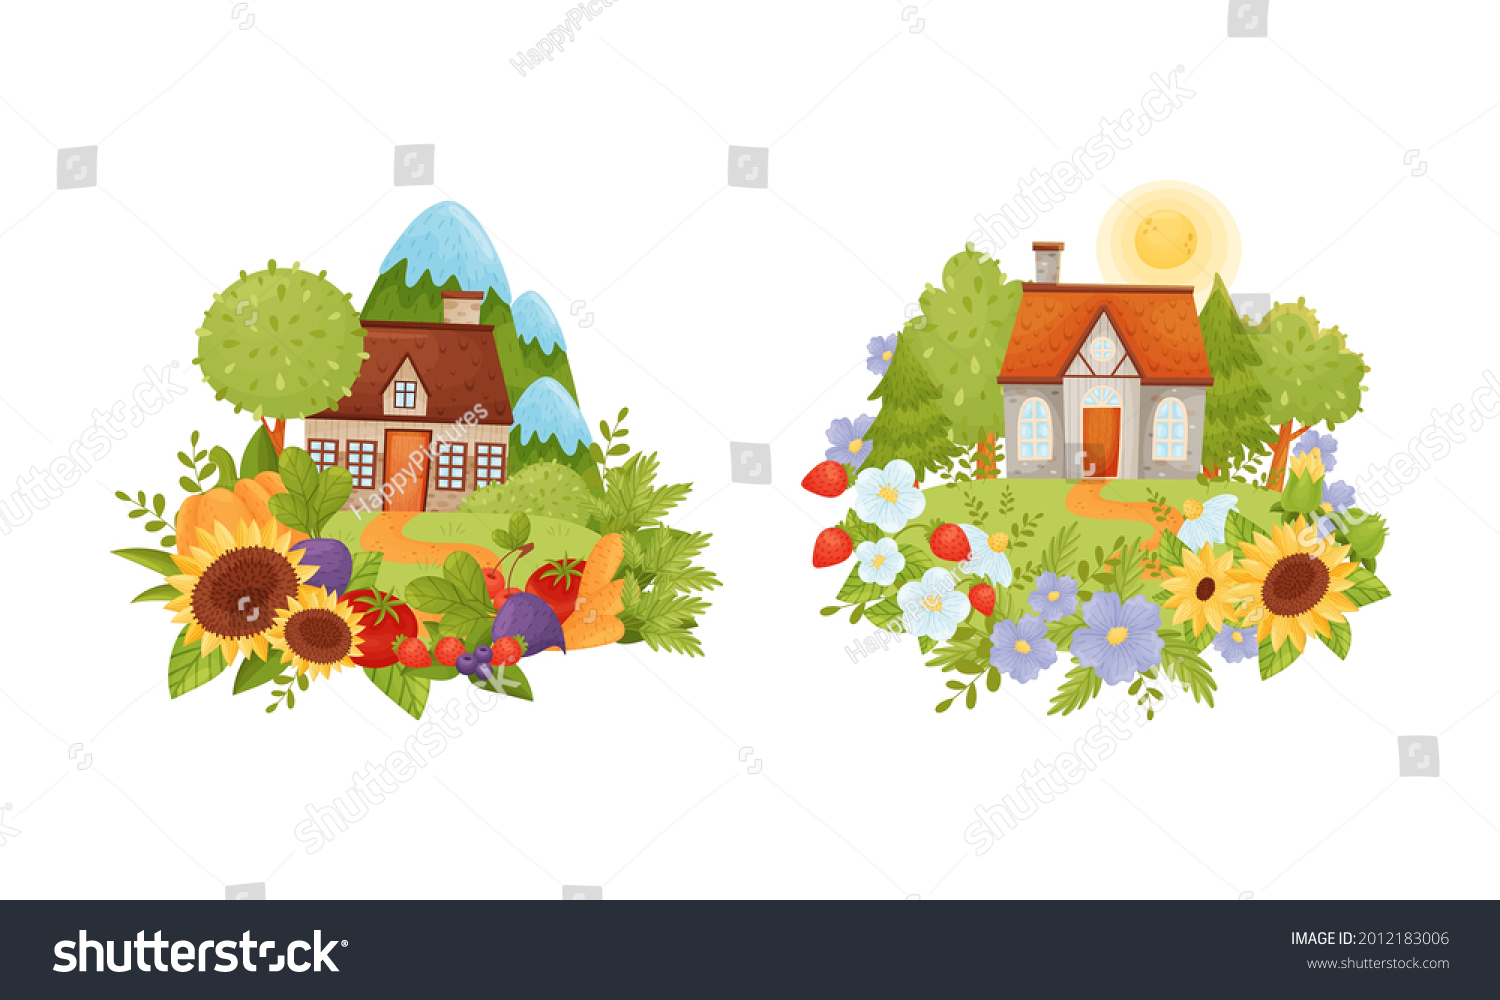 SVG of Village Houses Standing on Meadow with Winding Path Surrounded by Circular Crop and Flower Arrangement Vector Set svg